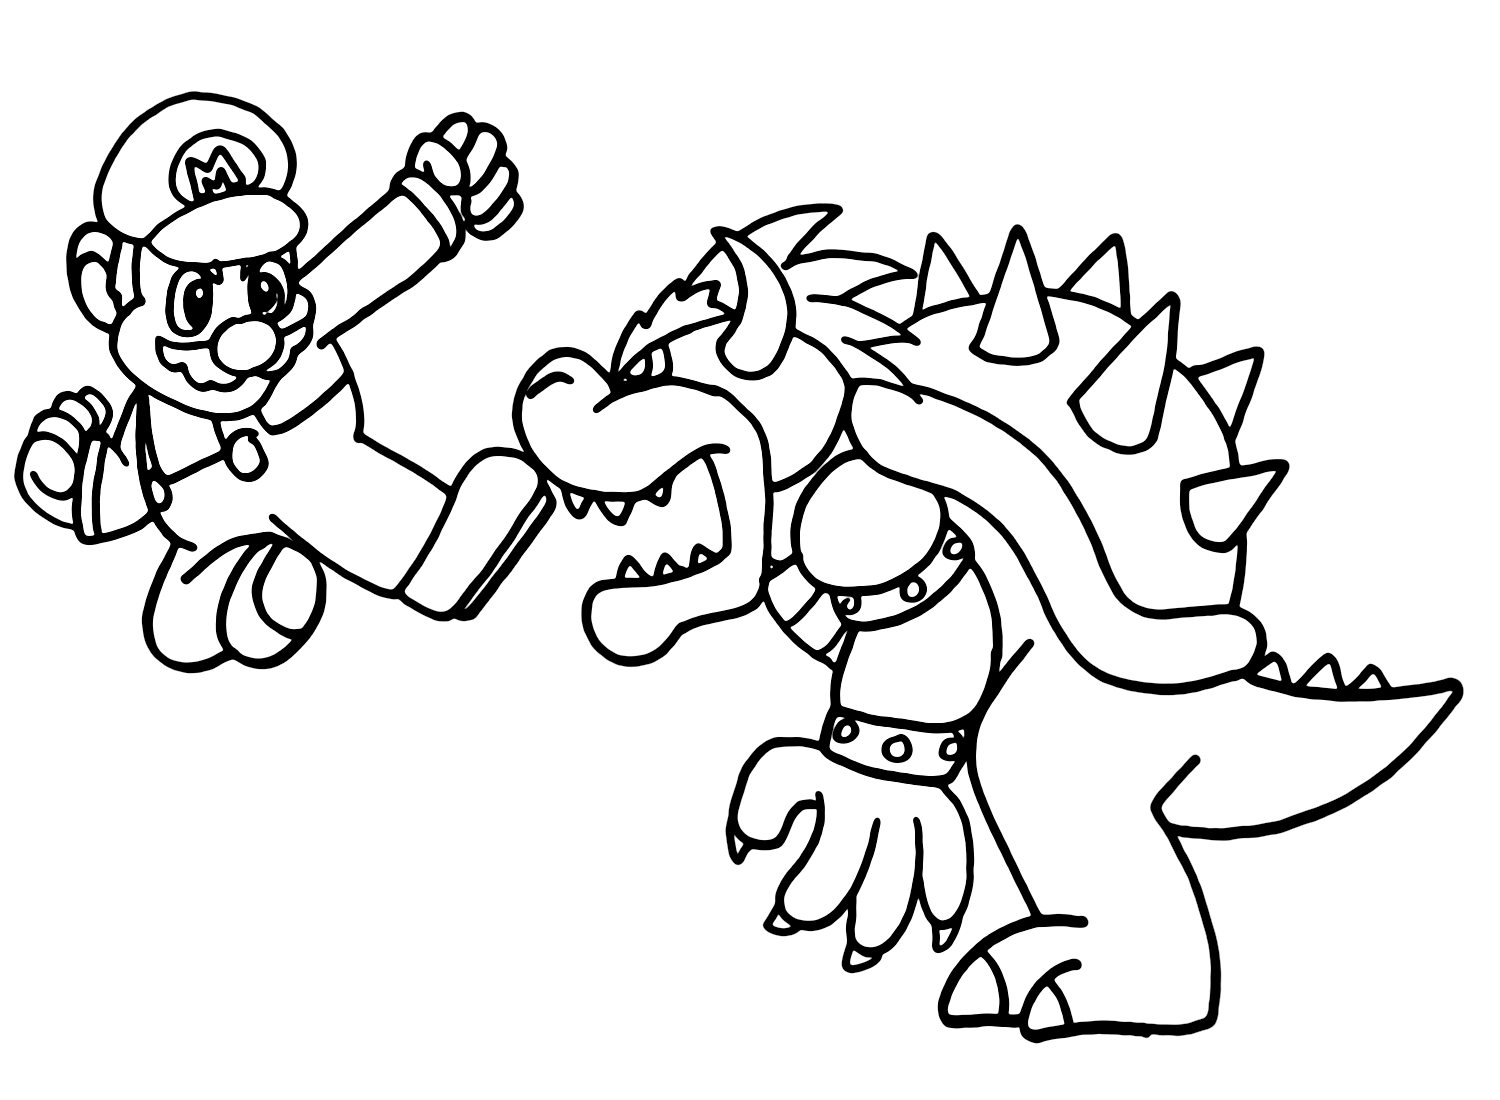 Bowser with Mario Coloring Page